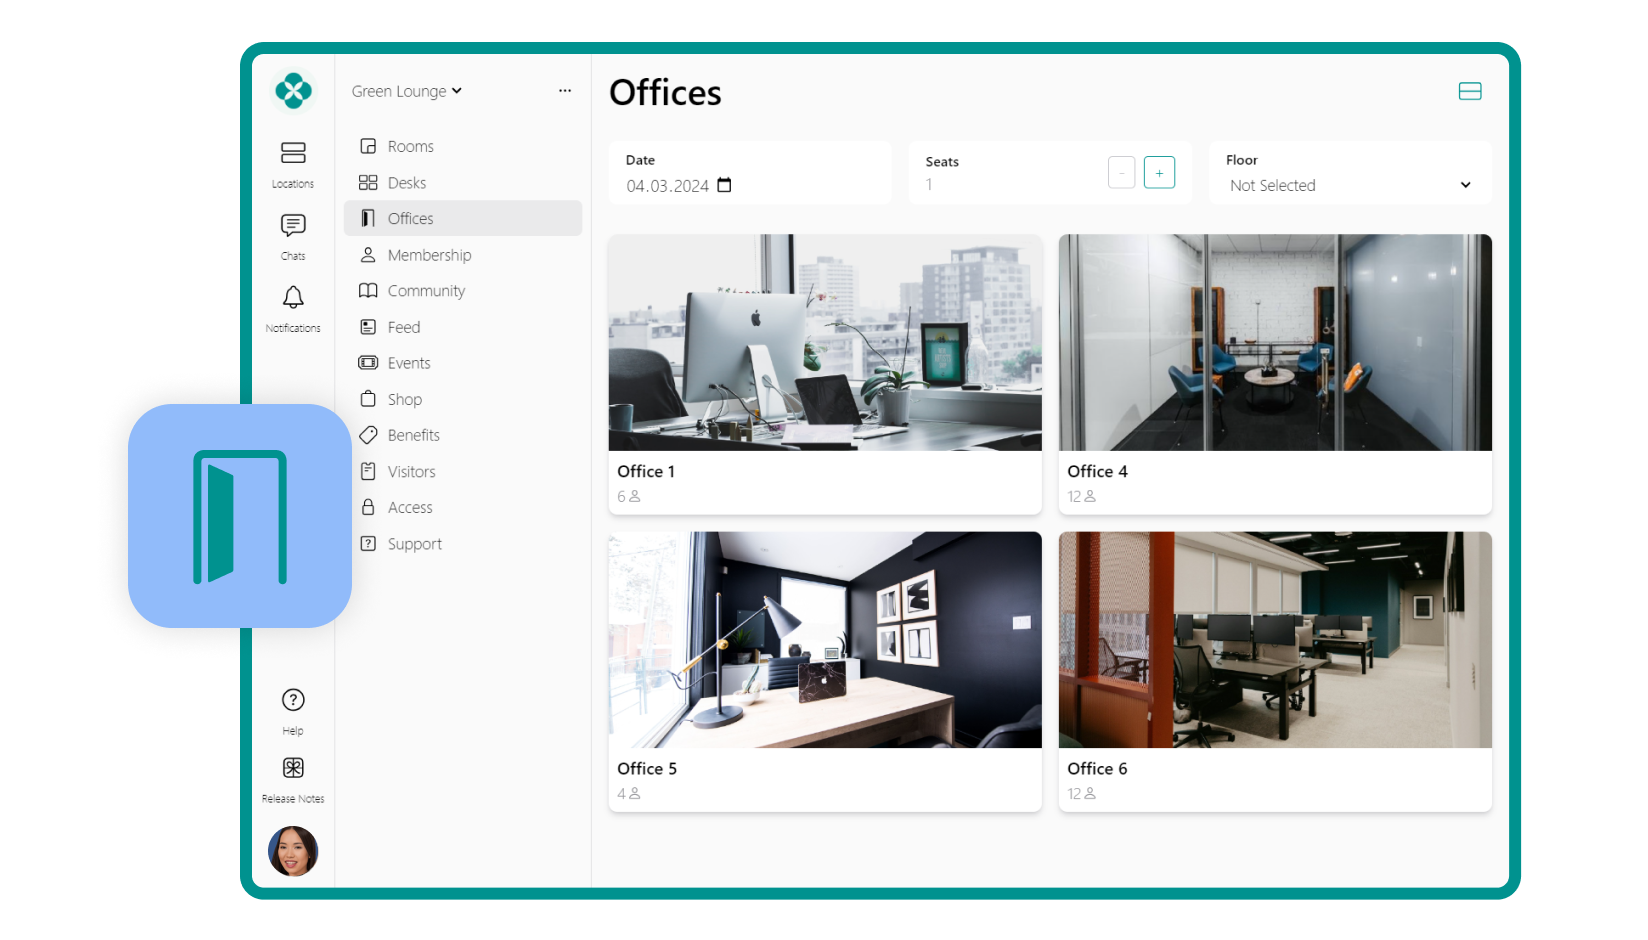 Offices Page